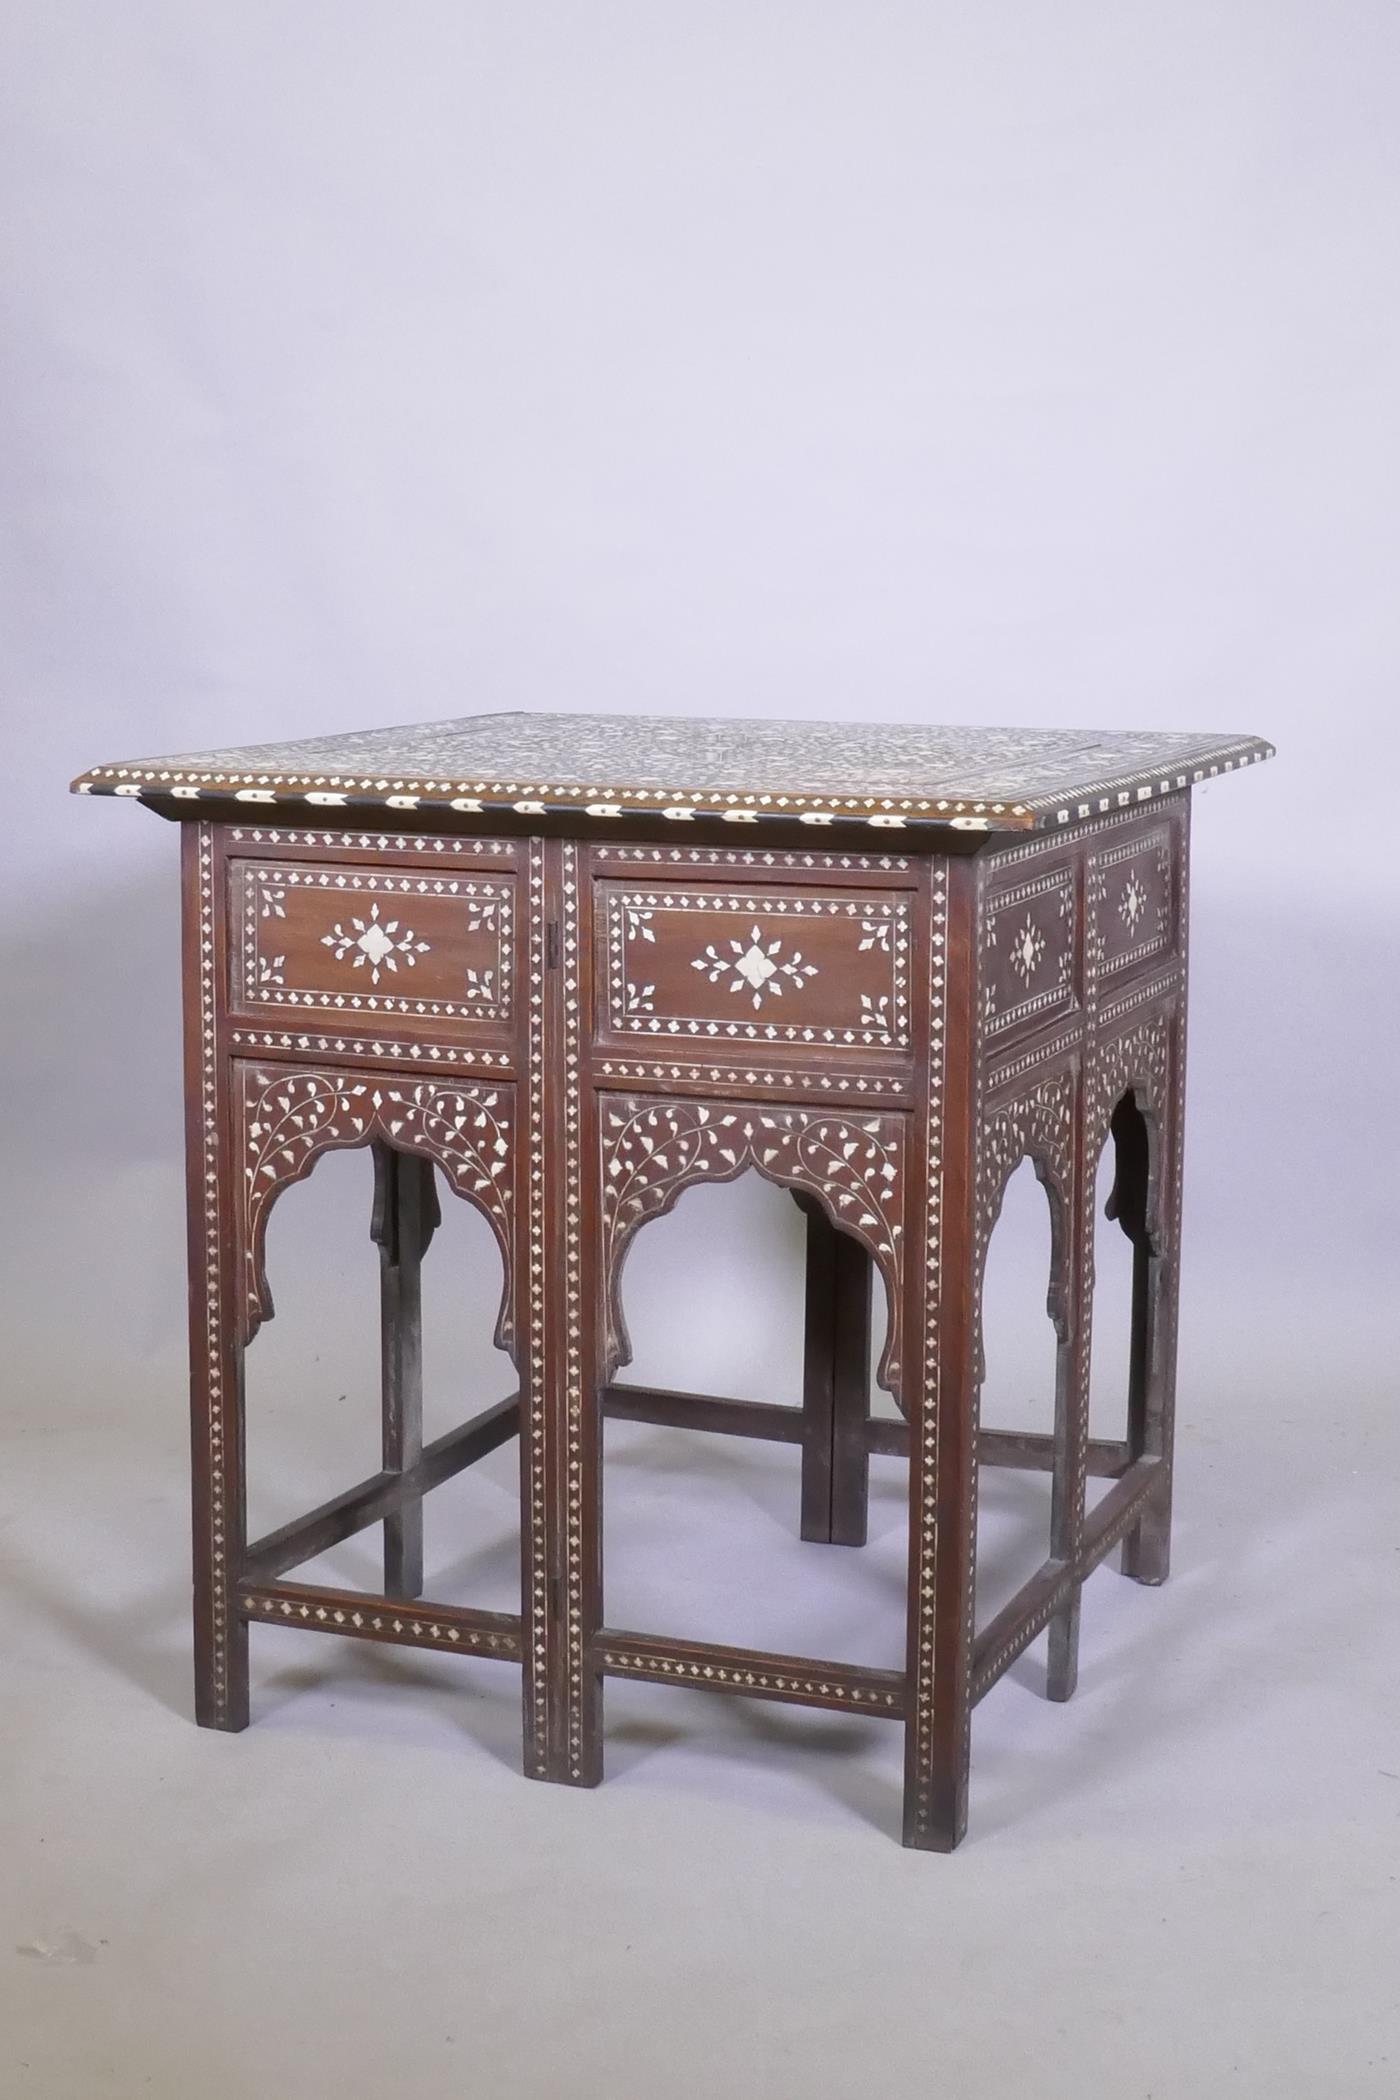 A C19th Moorish table with inlaid decoration and folding base, 61 x 61 x 63cm - Image 2 of 5